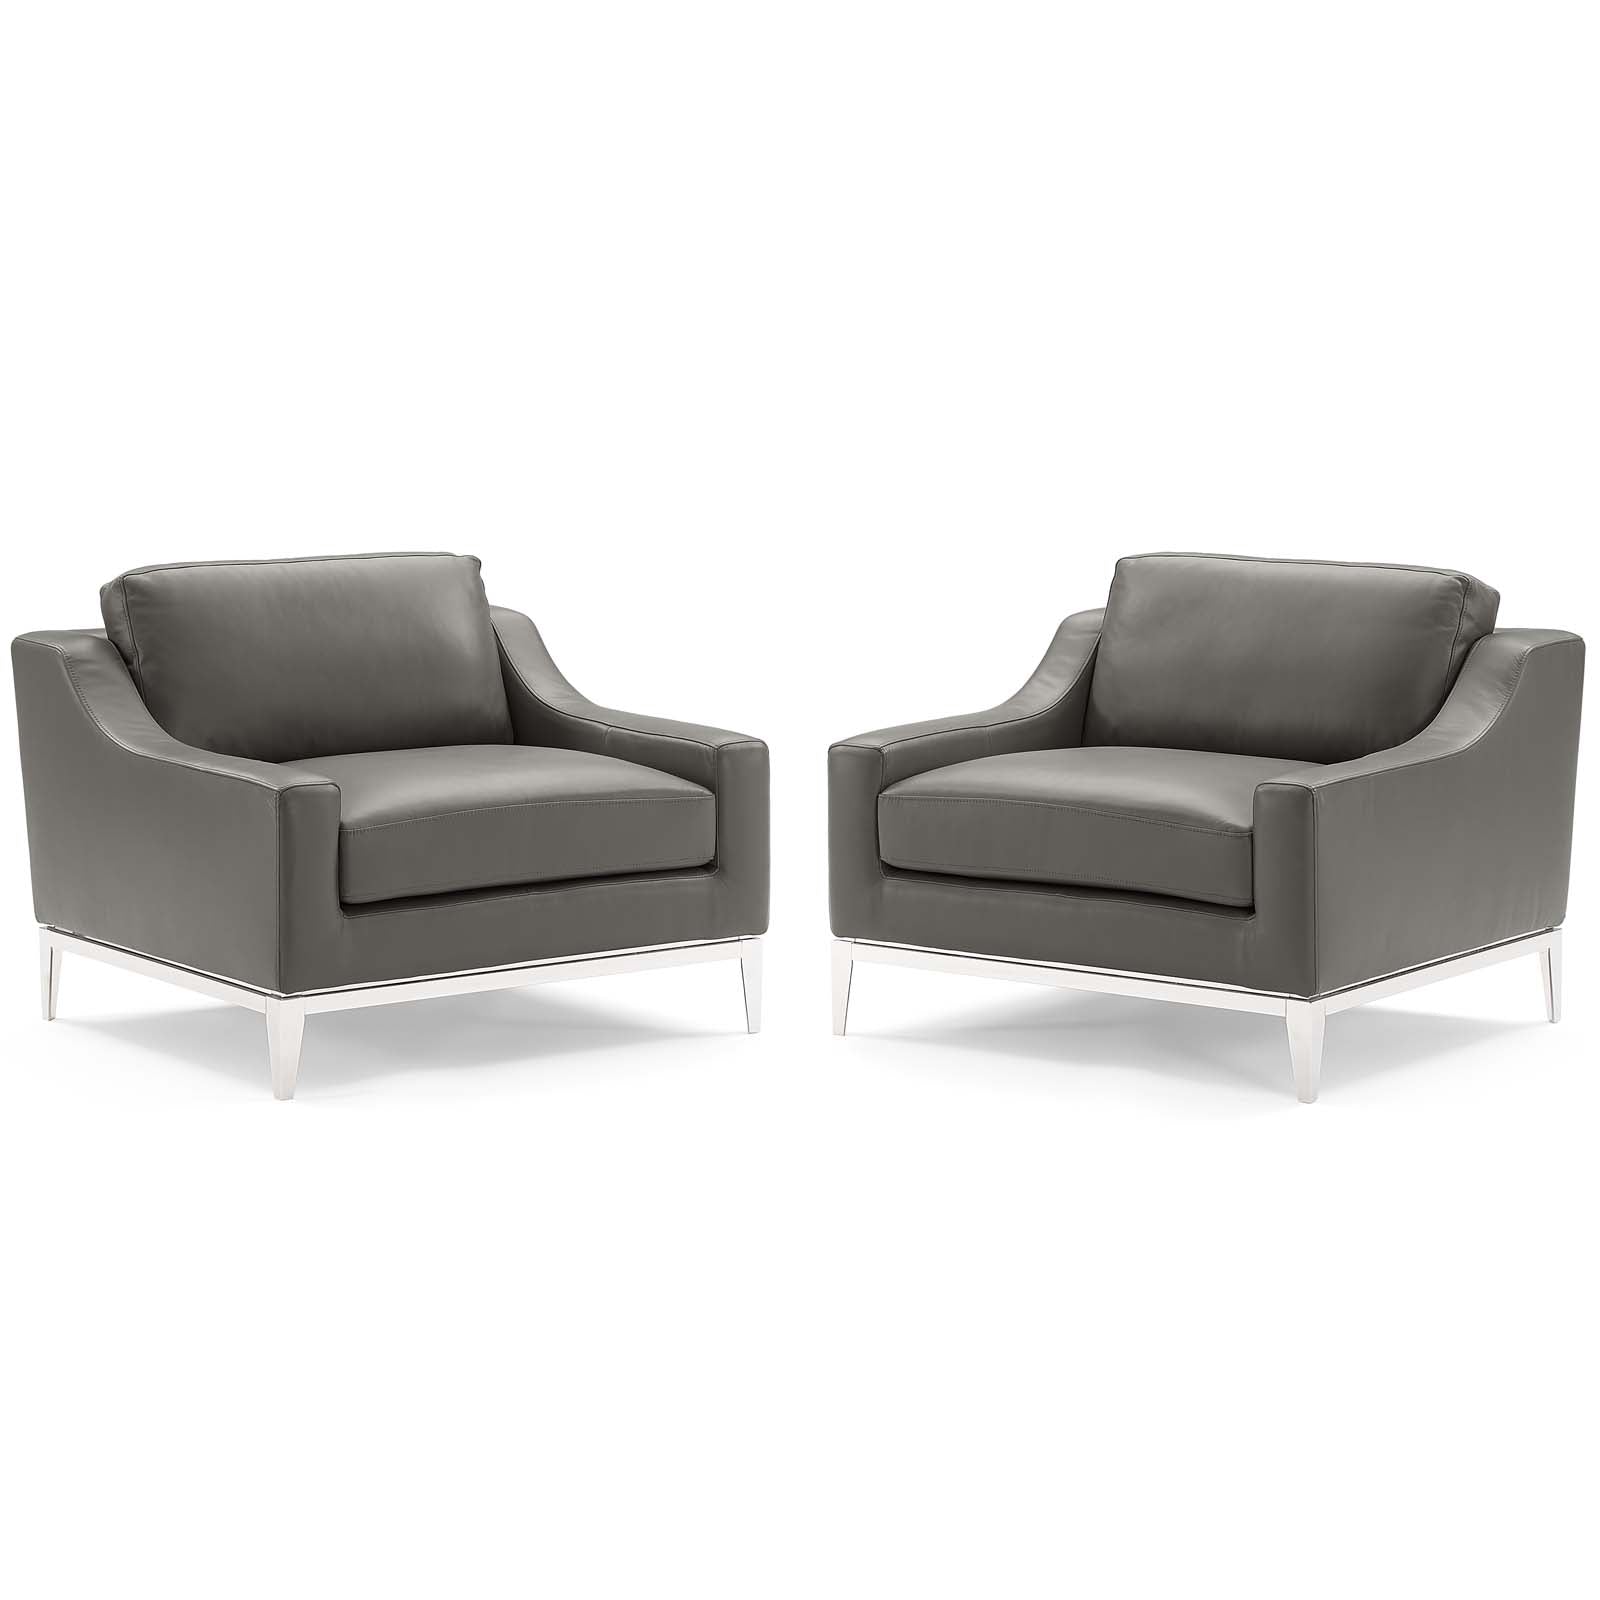 Modway Chairs - Harness Stainless Steel Base Leather Armchair Gray ( Set of 2 )